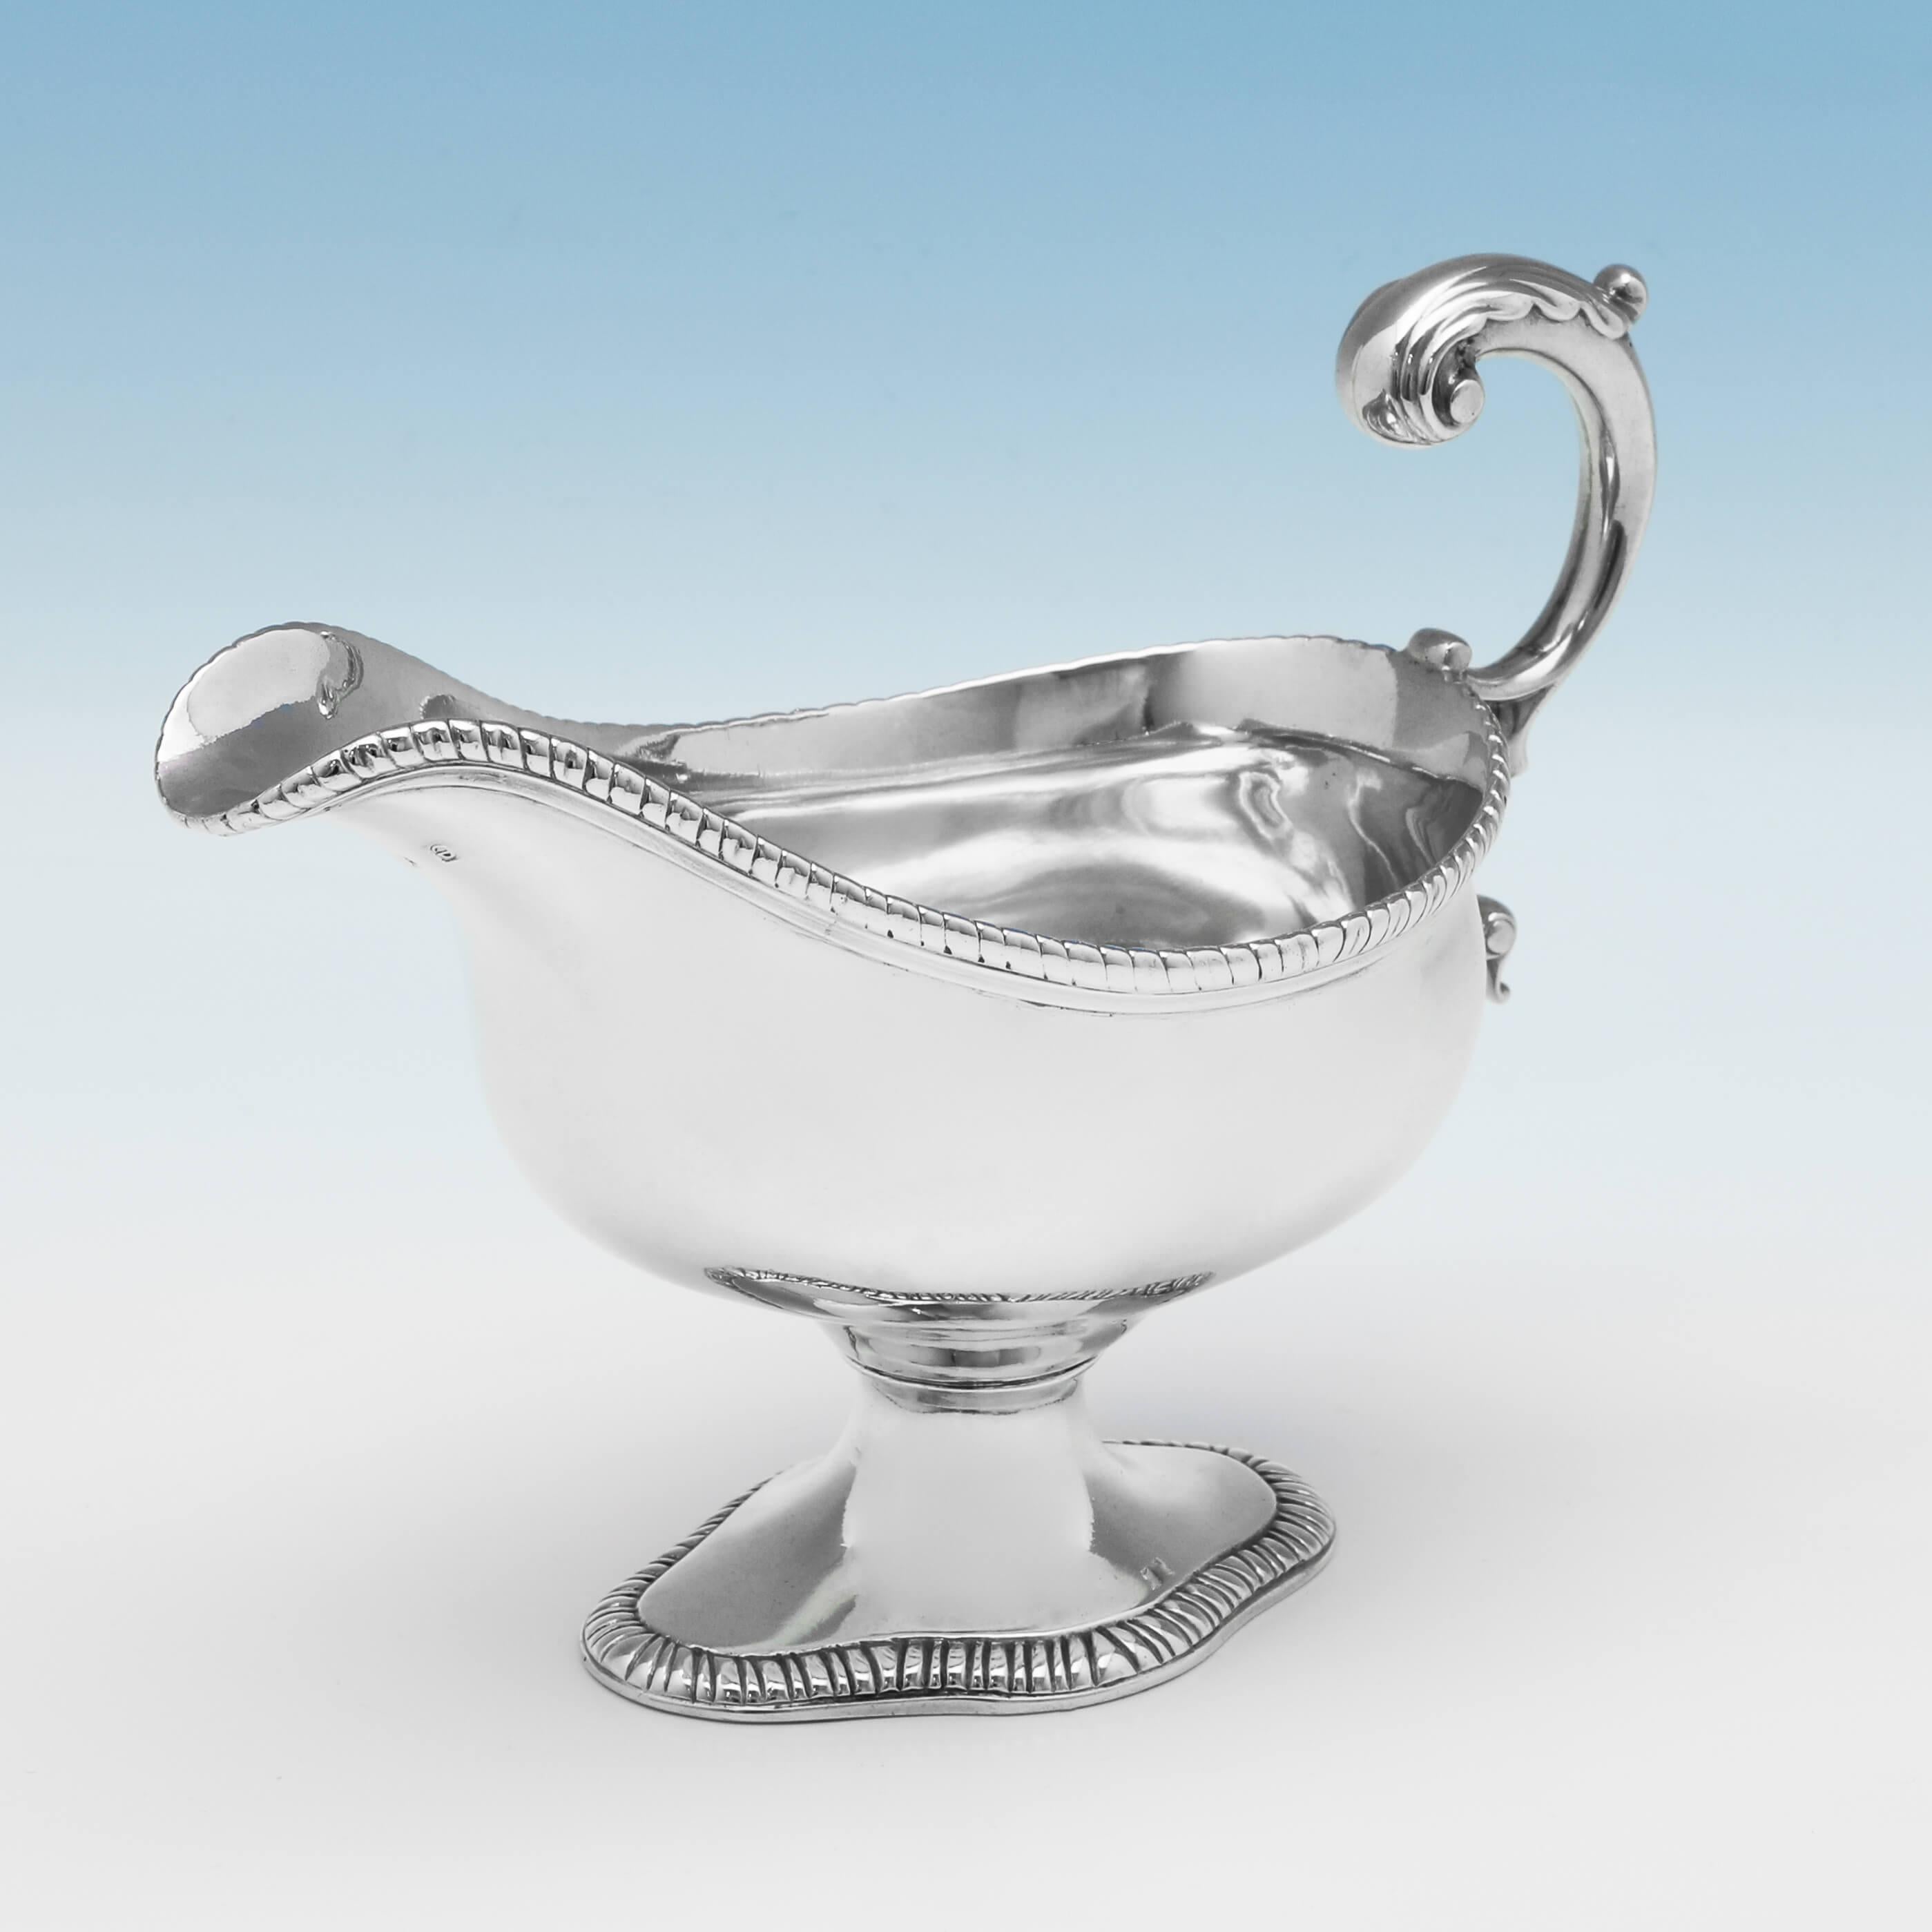 Hallmarked in London in 1780, this handsome, George III, antique sterling silver sauce boat, is plain in style, standing on a pedestal foot, and featuring gadroon borders, and an acanthus detailed flying C-scroll handle. The sauce boat measures 5